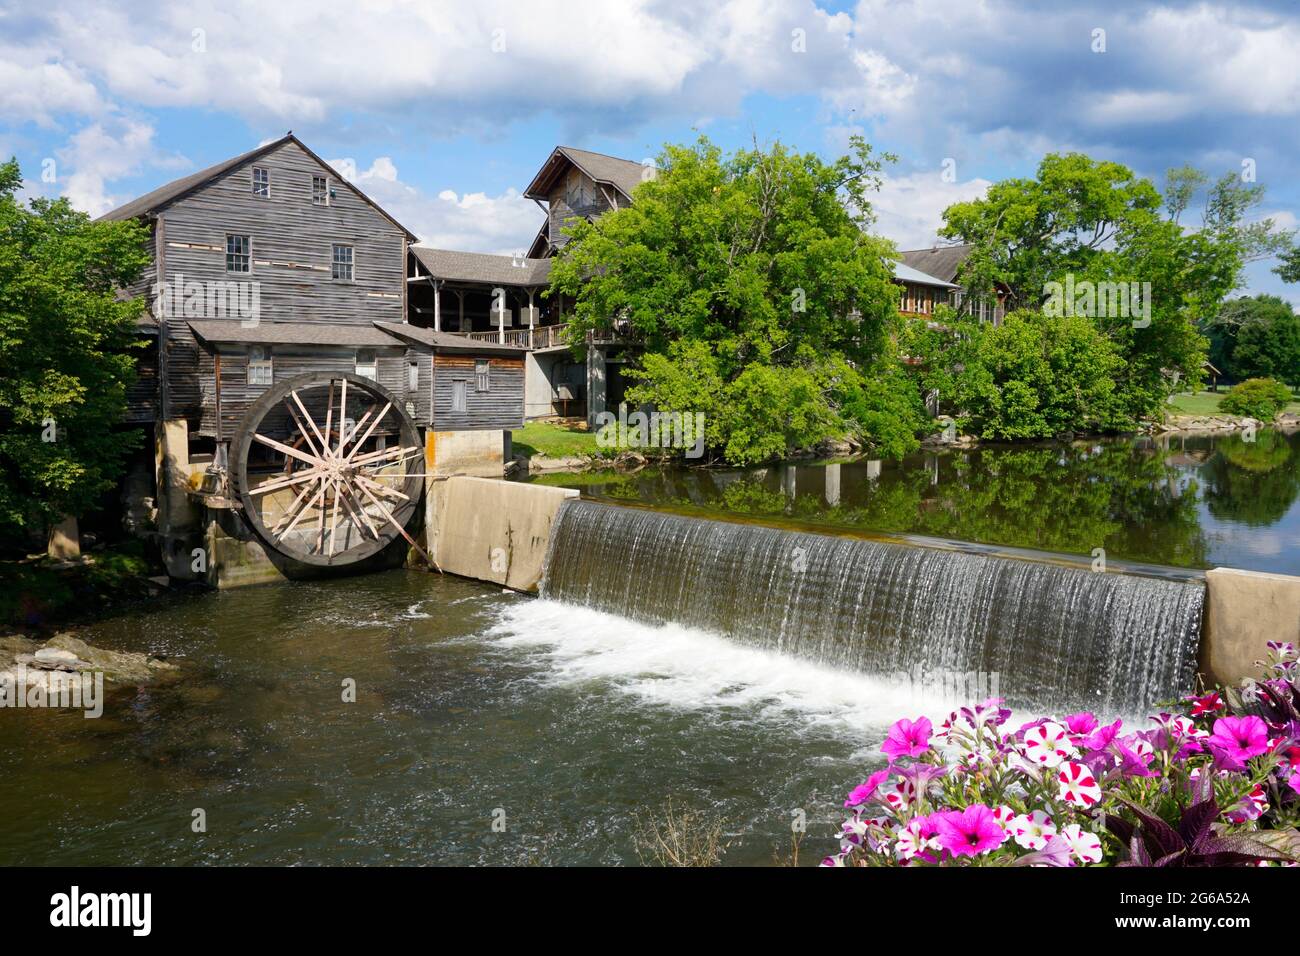 Pigeon Forge, Tennessee, USA. June 24, 2021 - The Old Mill along the Little Pigeon River in Tennessee Stock Photo